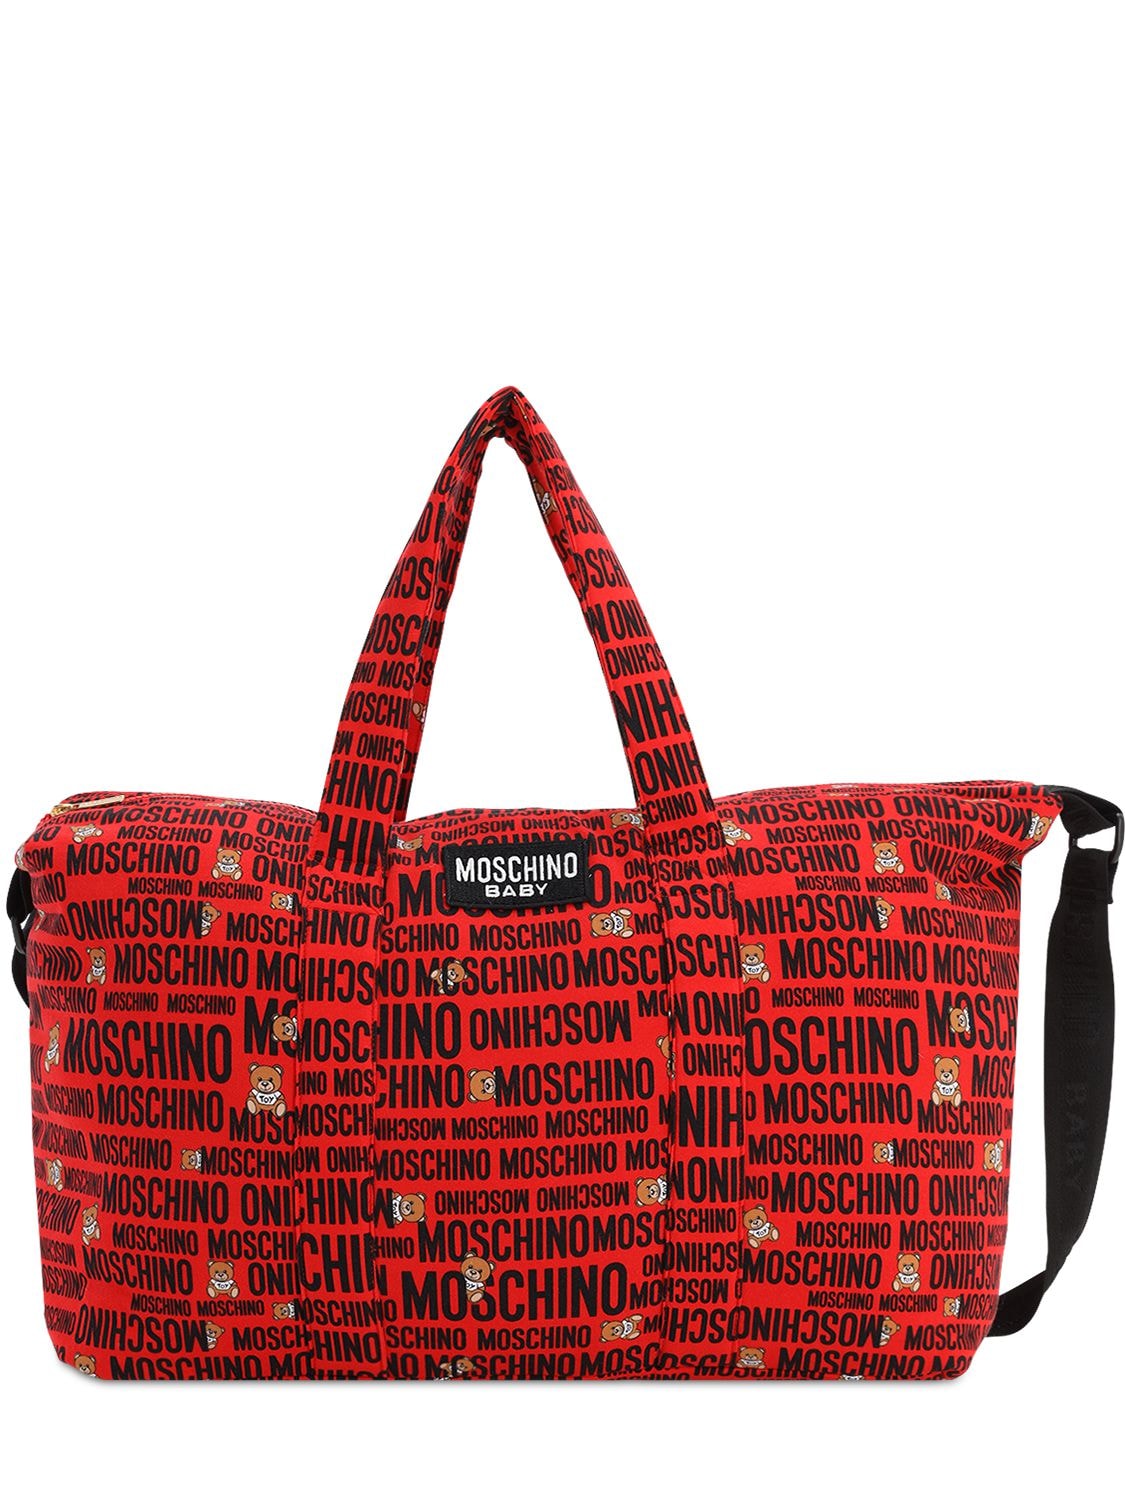 Moschino Kids' Cotton Blend Changing Bag & Changing Mat In Red,black